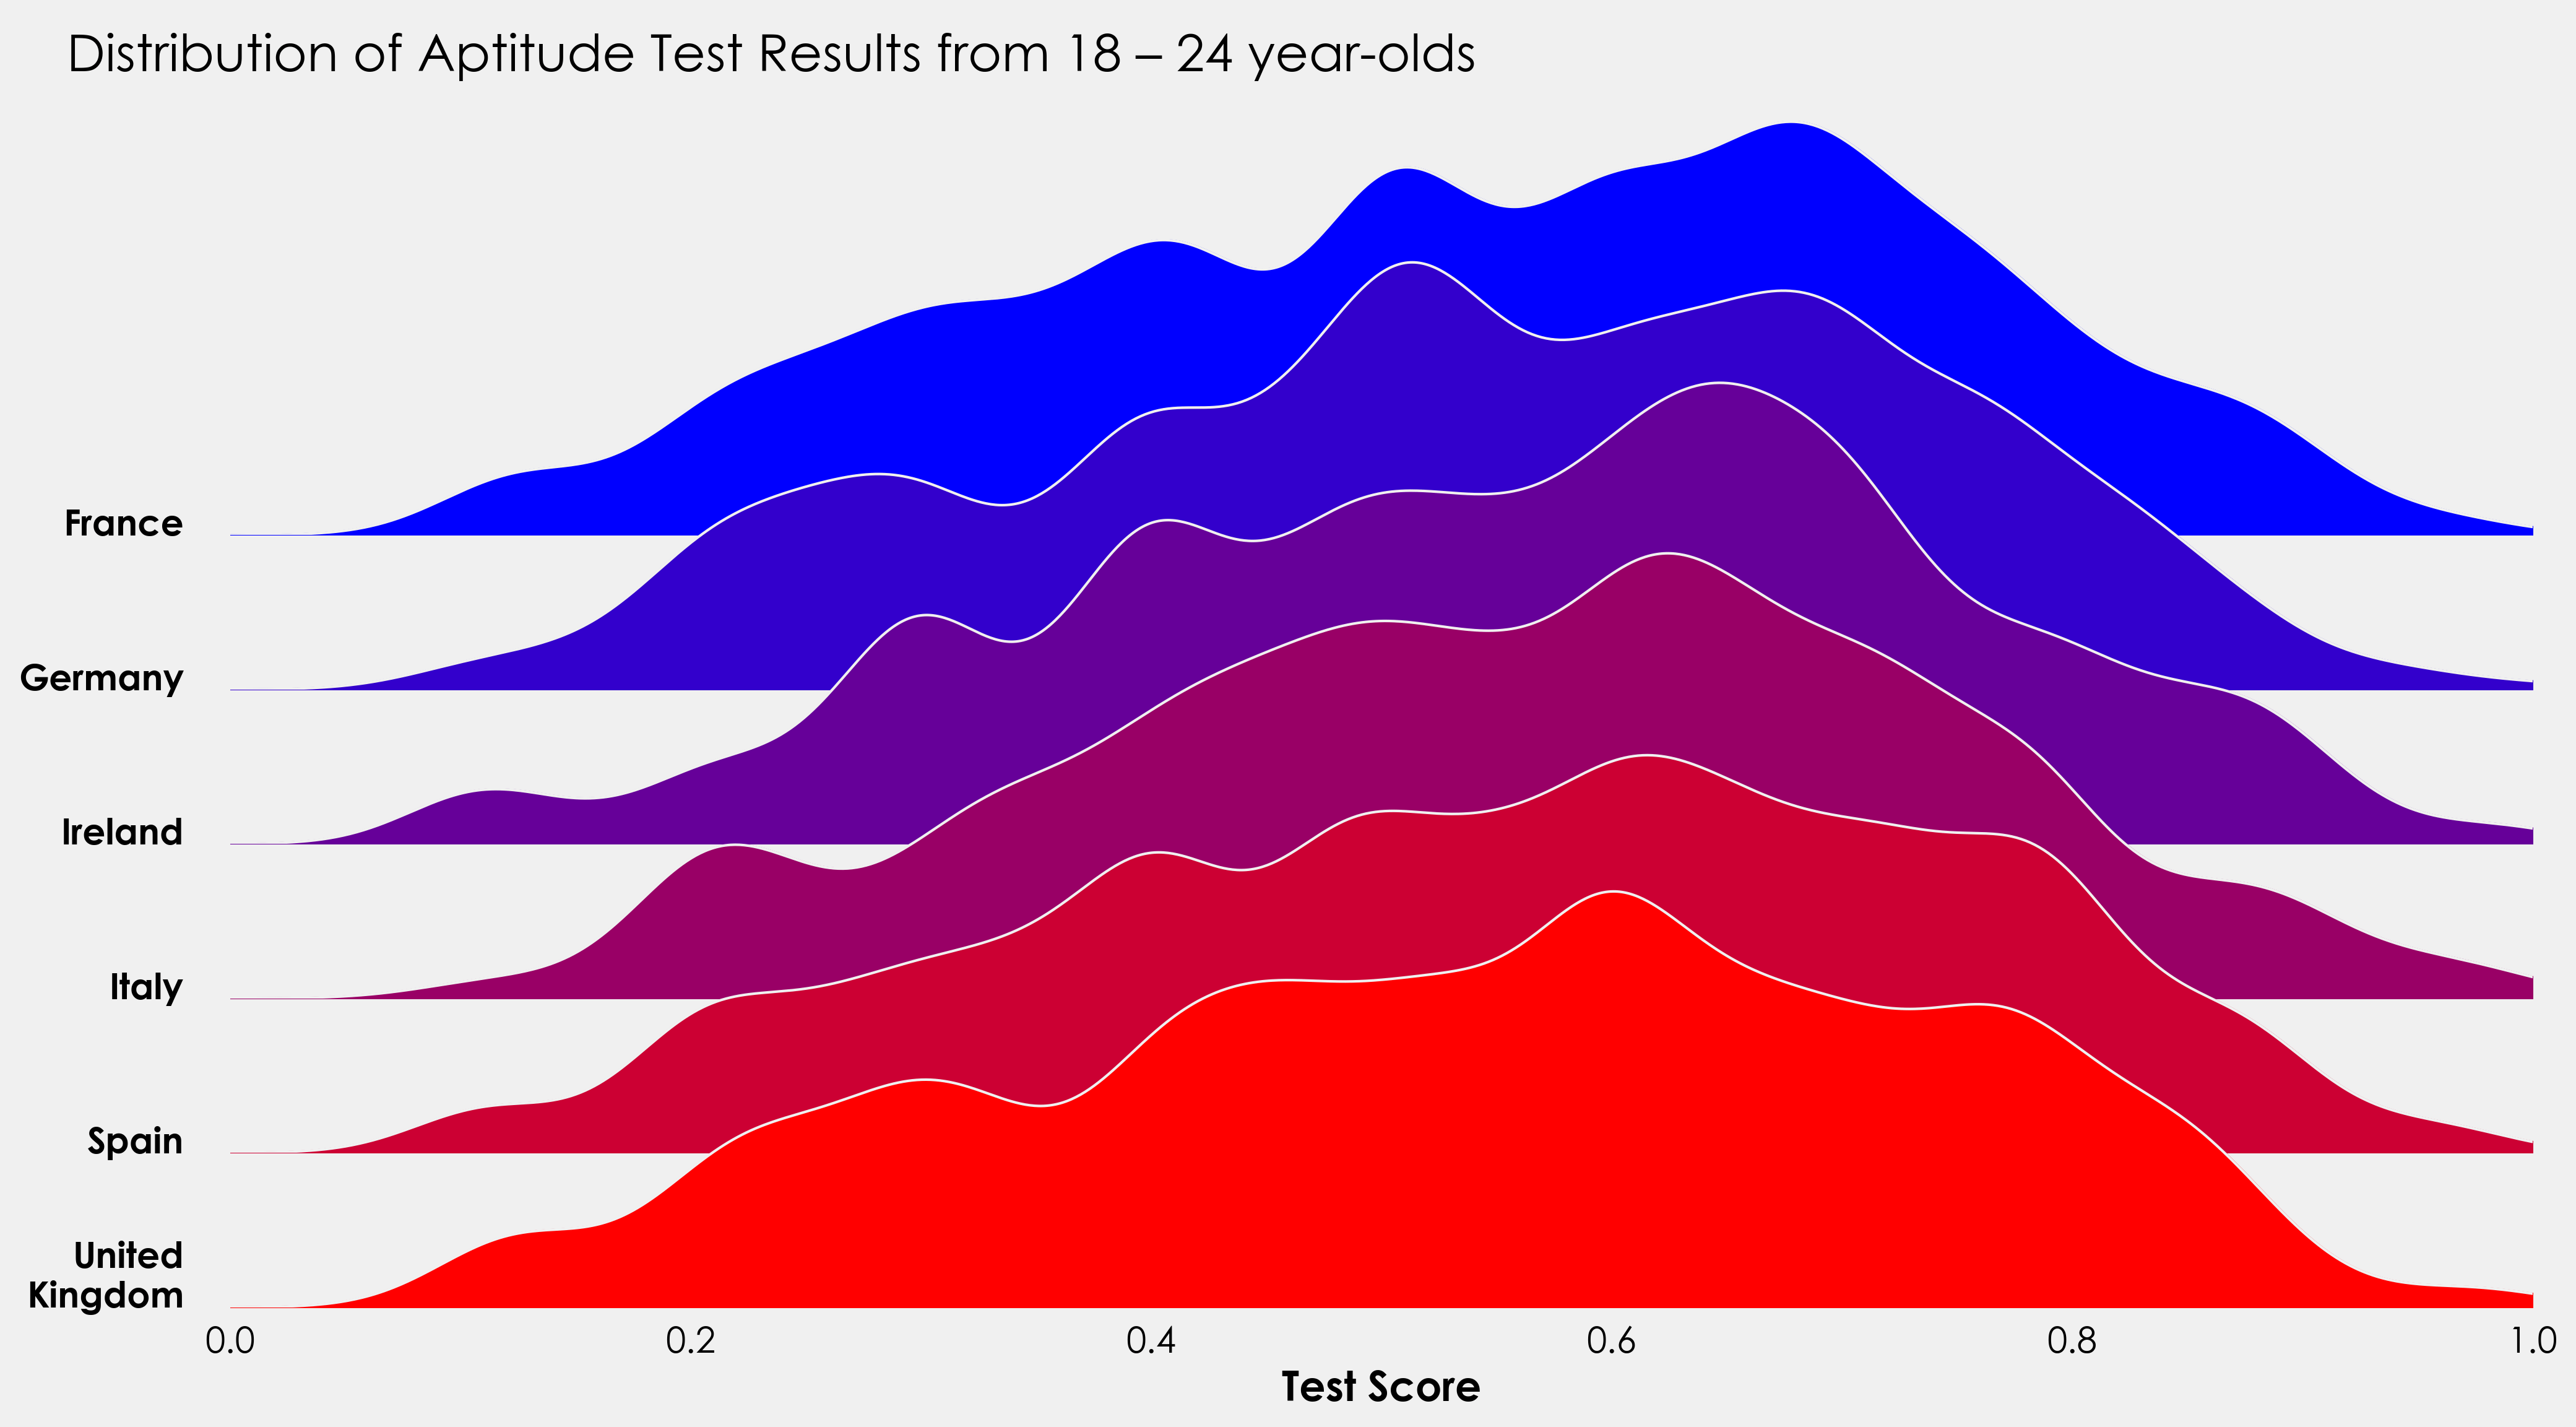 6 kernel density estimate (KDE) charts each representing 6 countries. France is blue, Germany is dark blue, Ireland is purple, Italy is a lighter shade of purple, Spain is red, and the United Kingdom is blood red.  The x-axis shows the distribution of aptitude test results from 18 to 24 years old in each county listed.